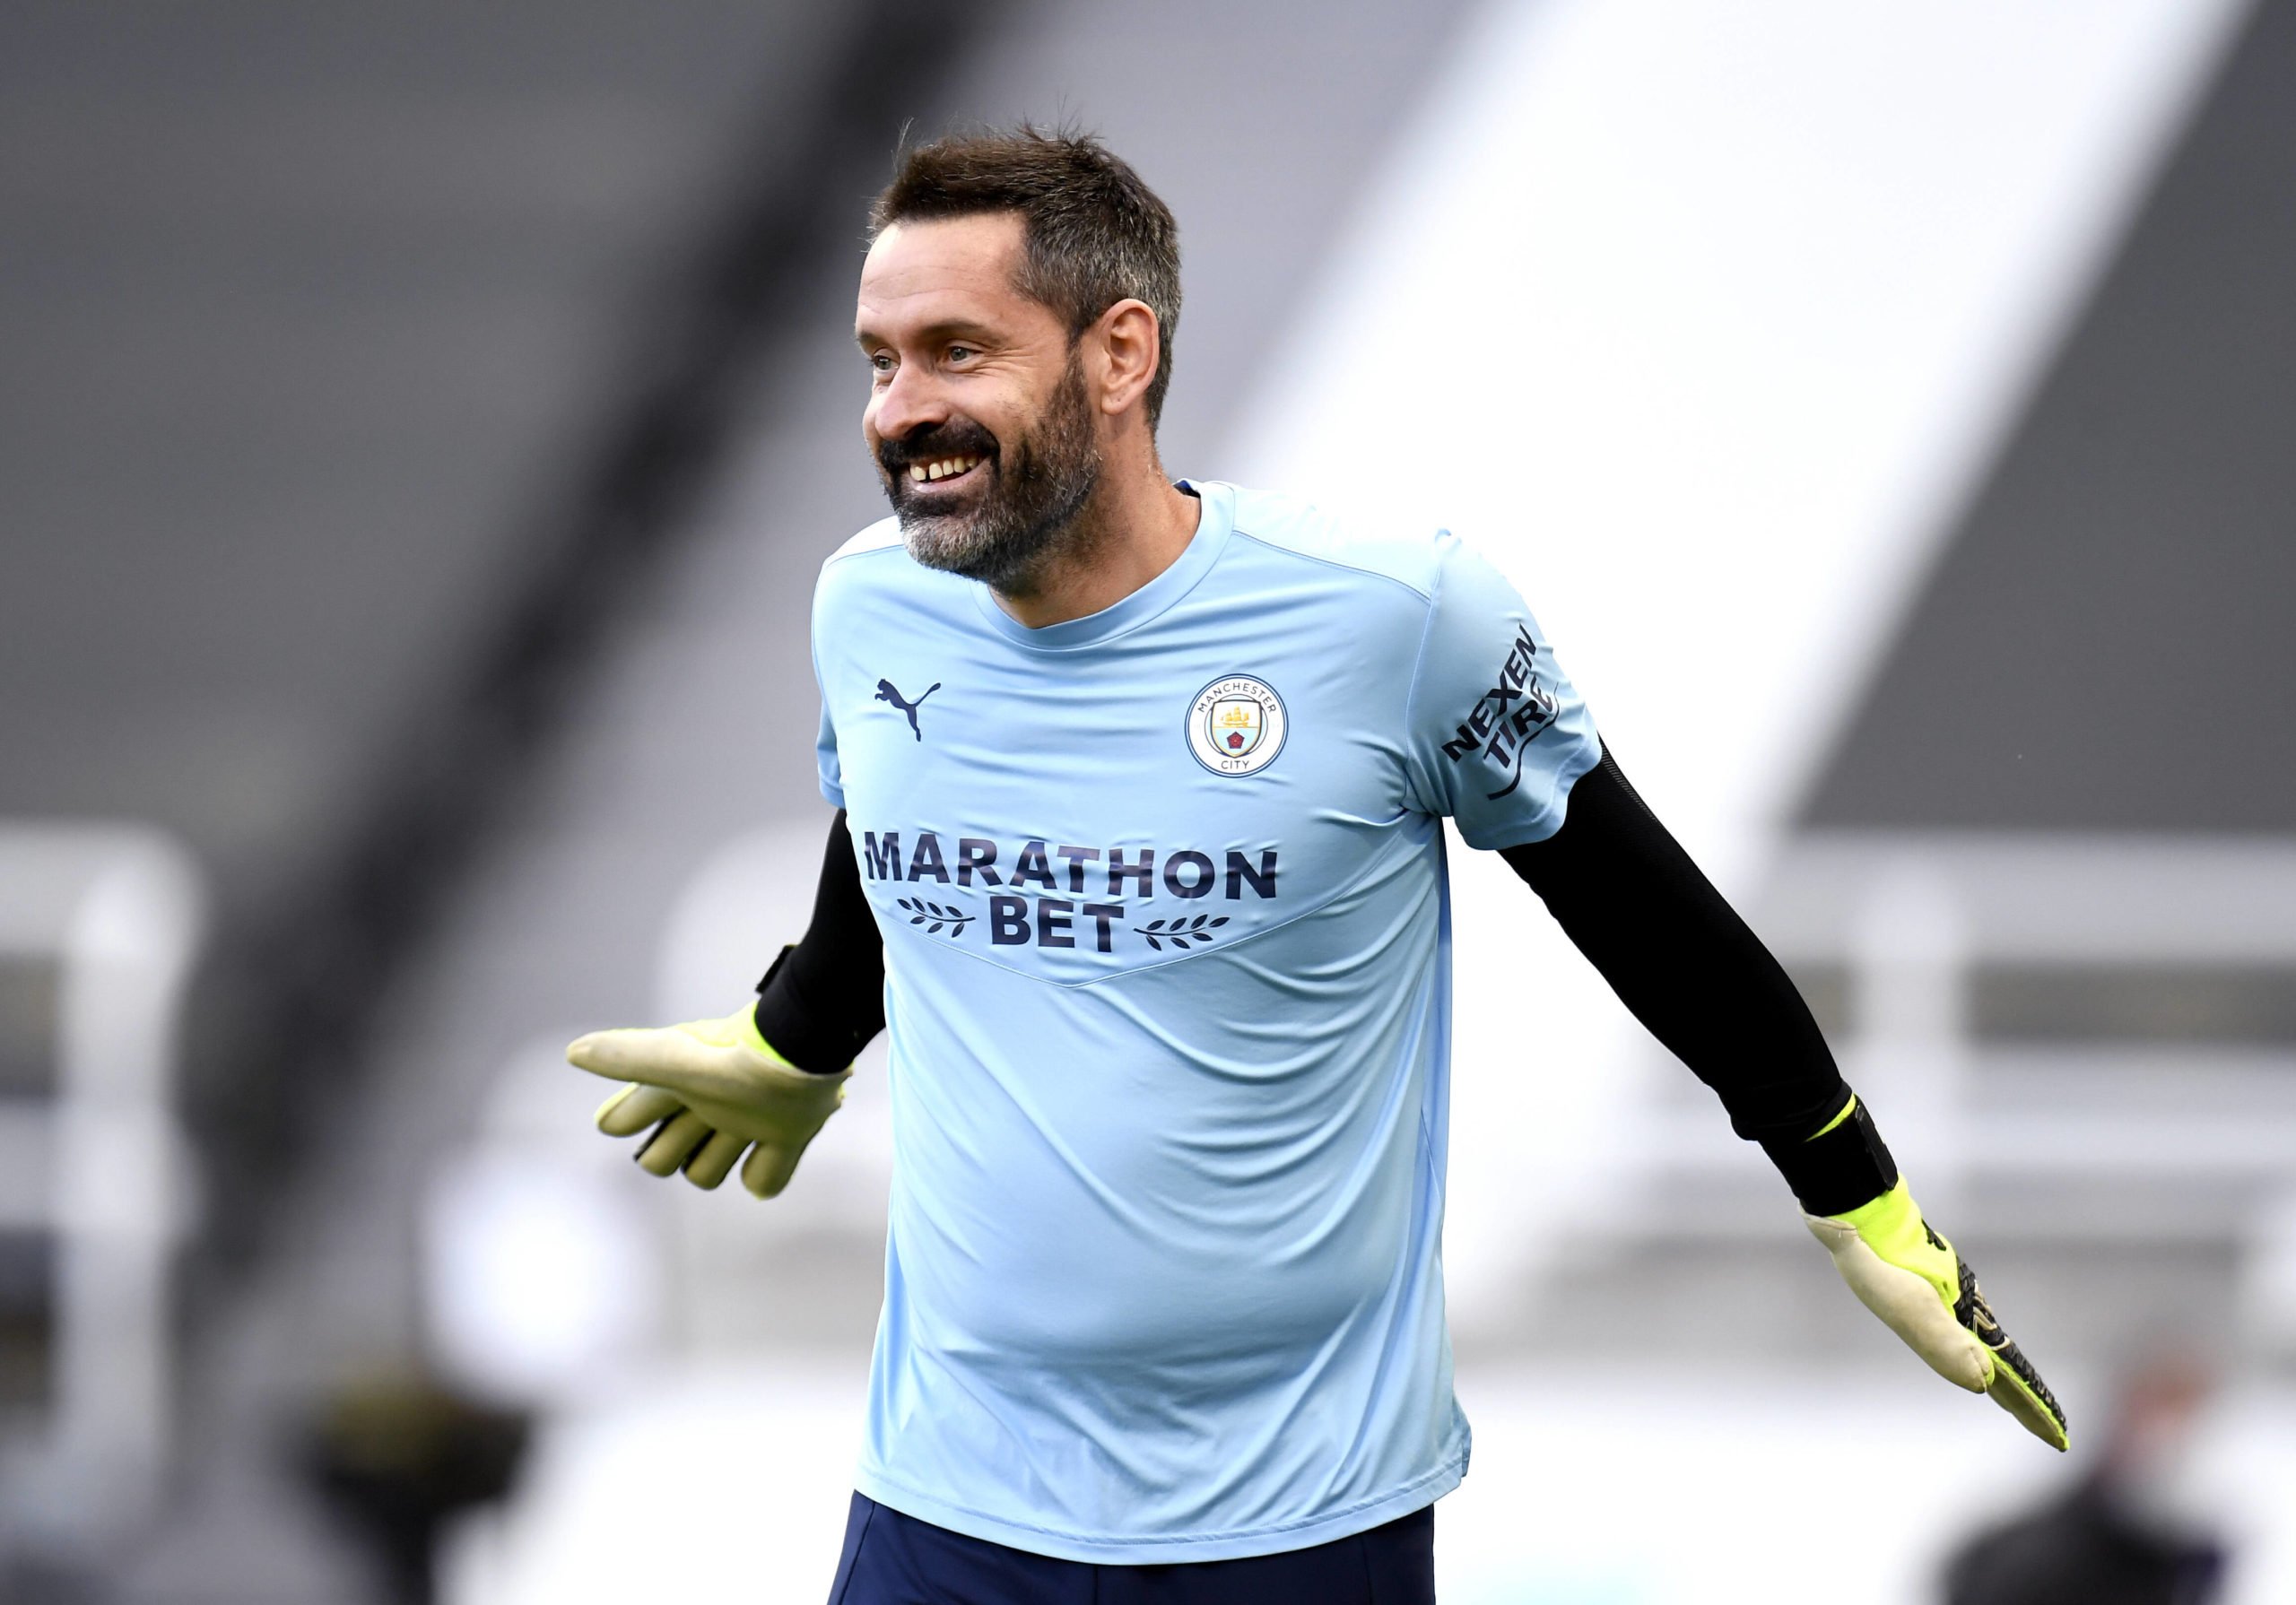 Predicted Manchester City Lineup Vs Leicester City - Scott Carson to start.